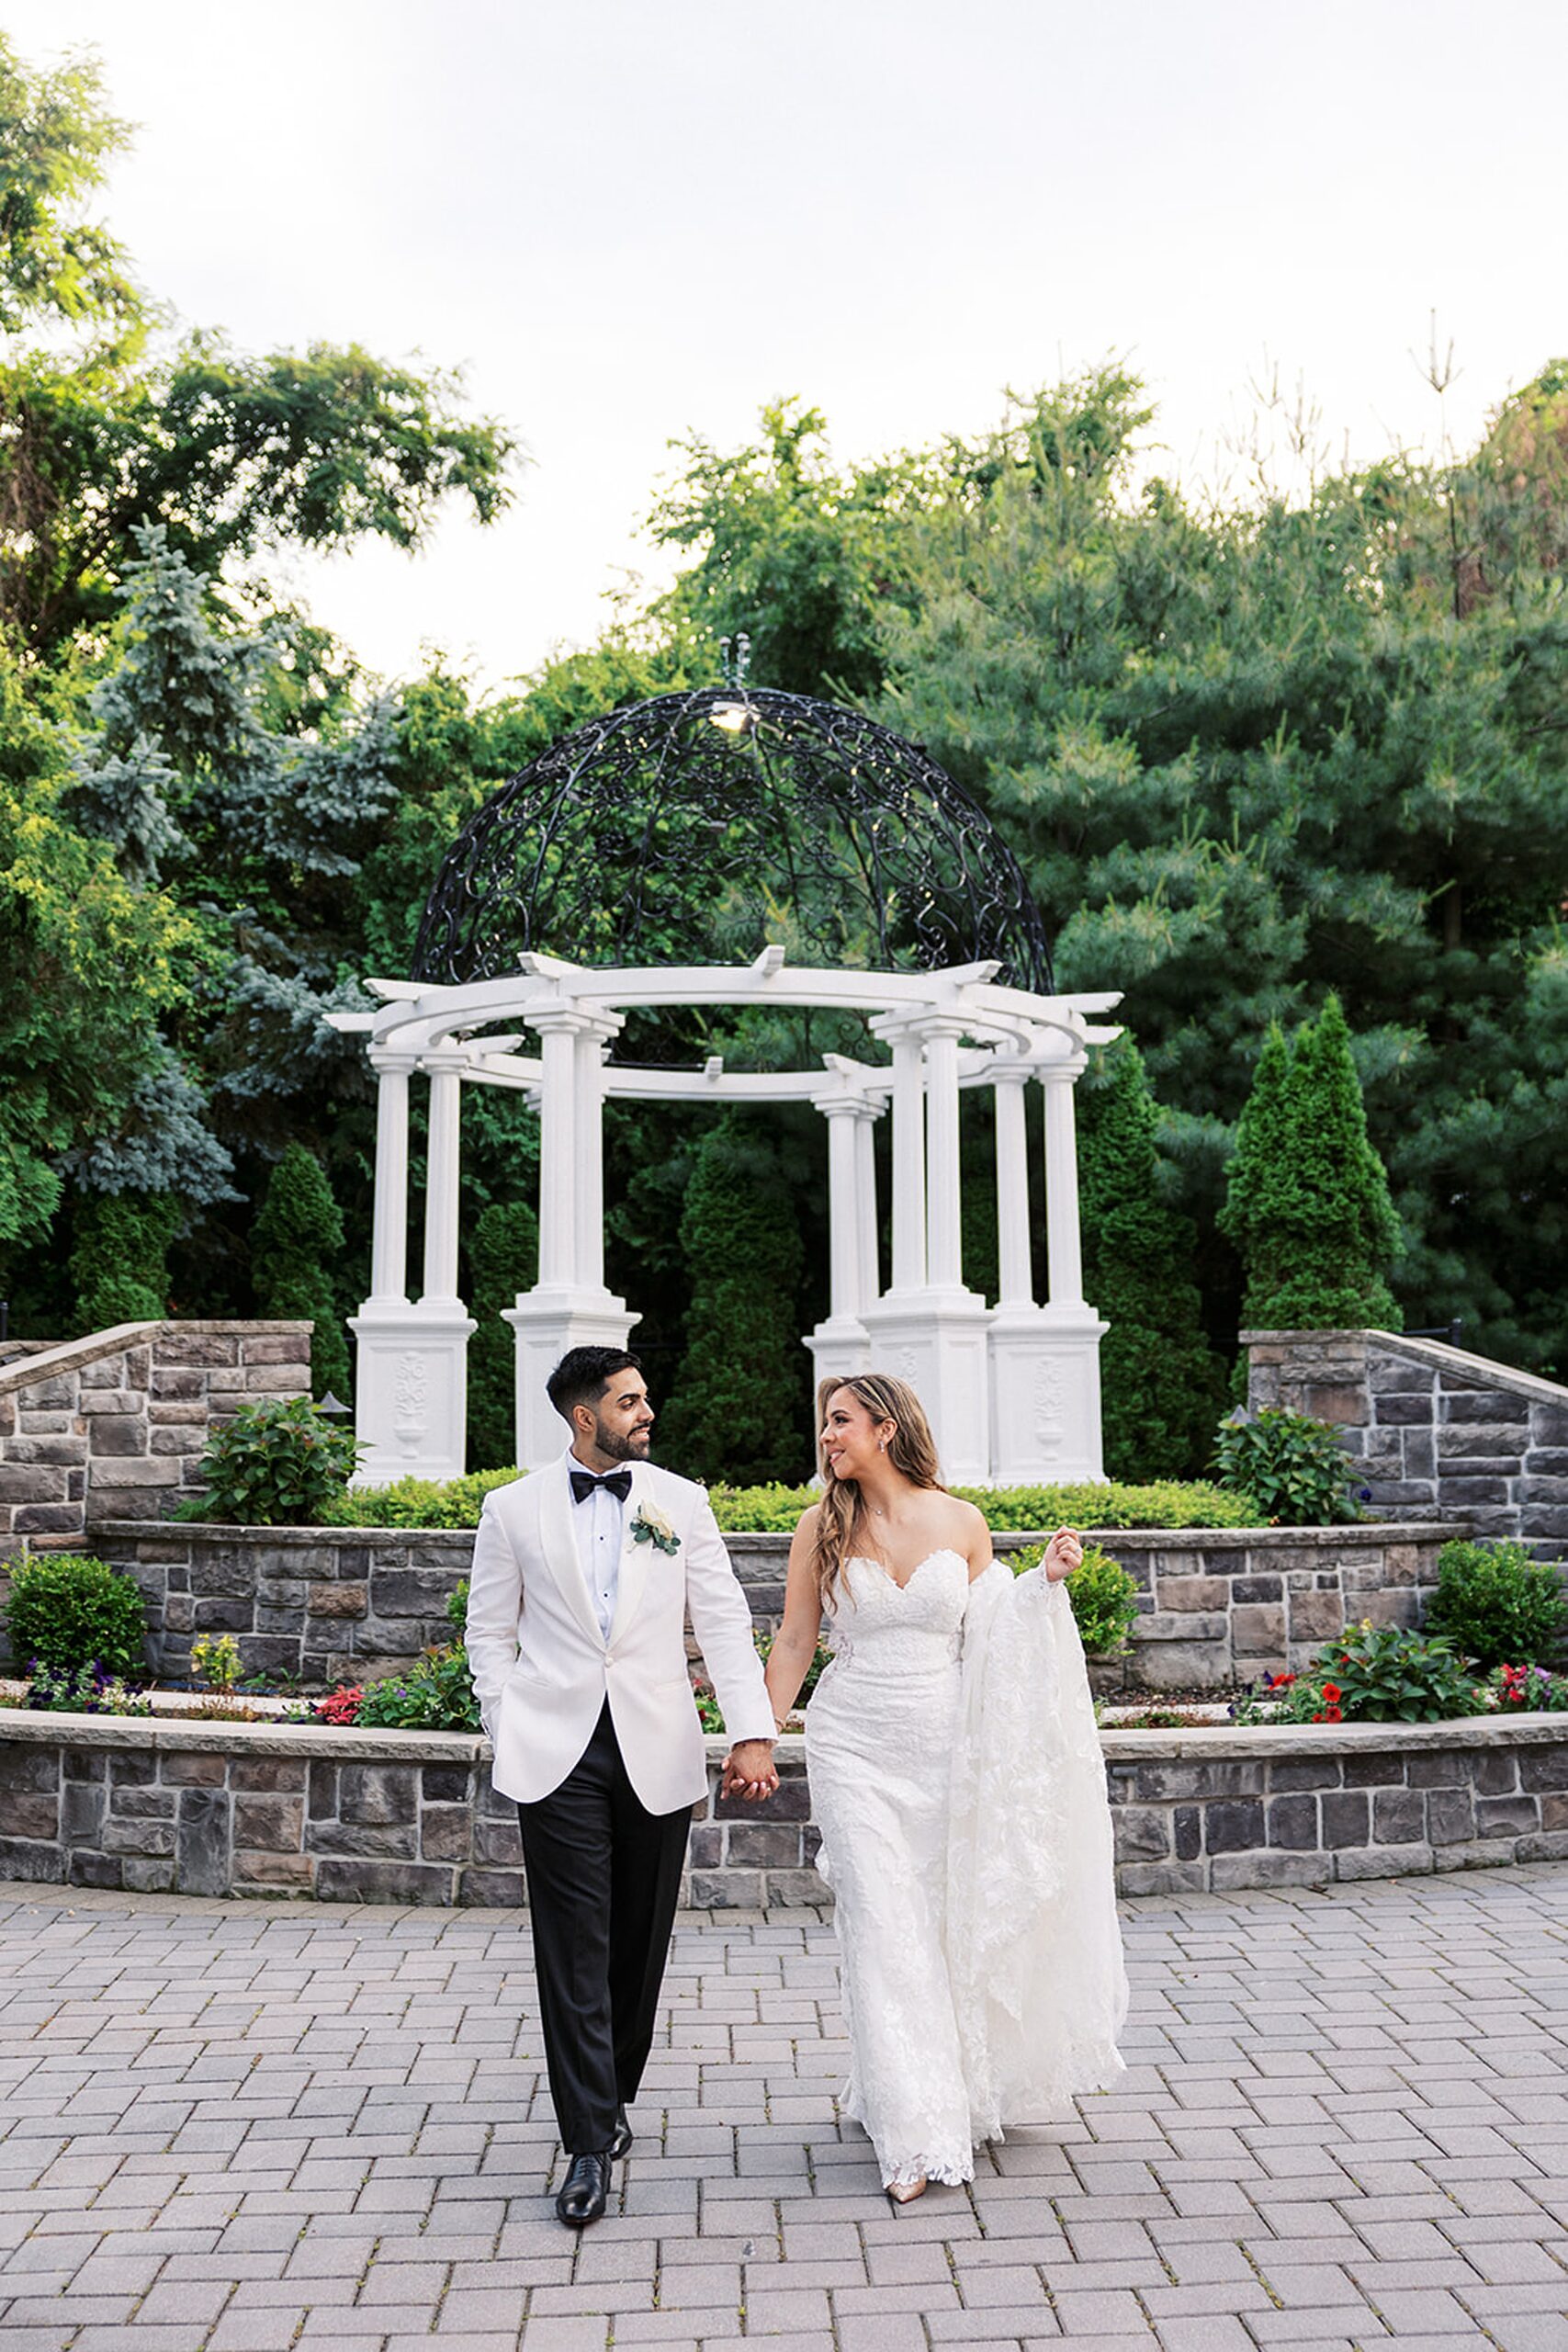 Newlyweds hold hands while walking through a garden path with a large white gazebo